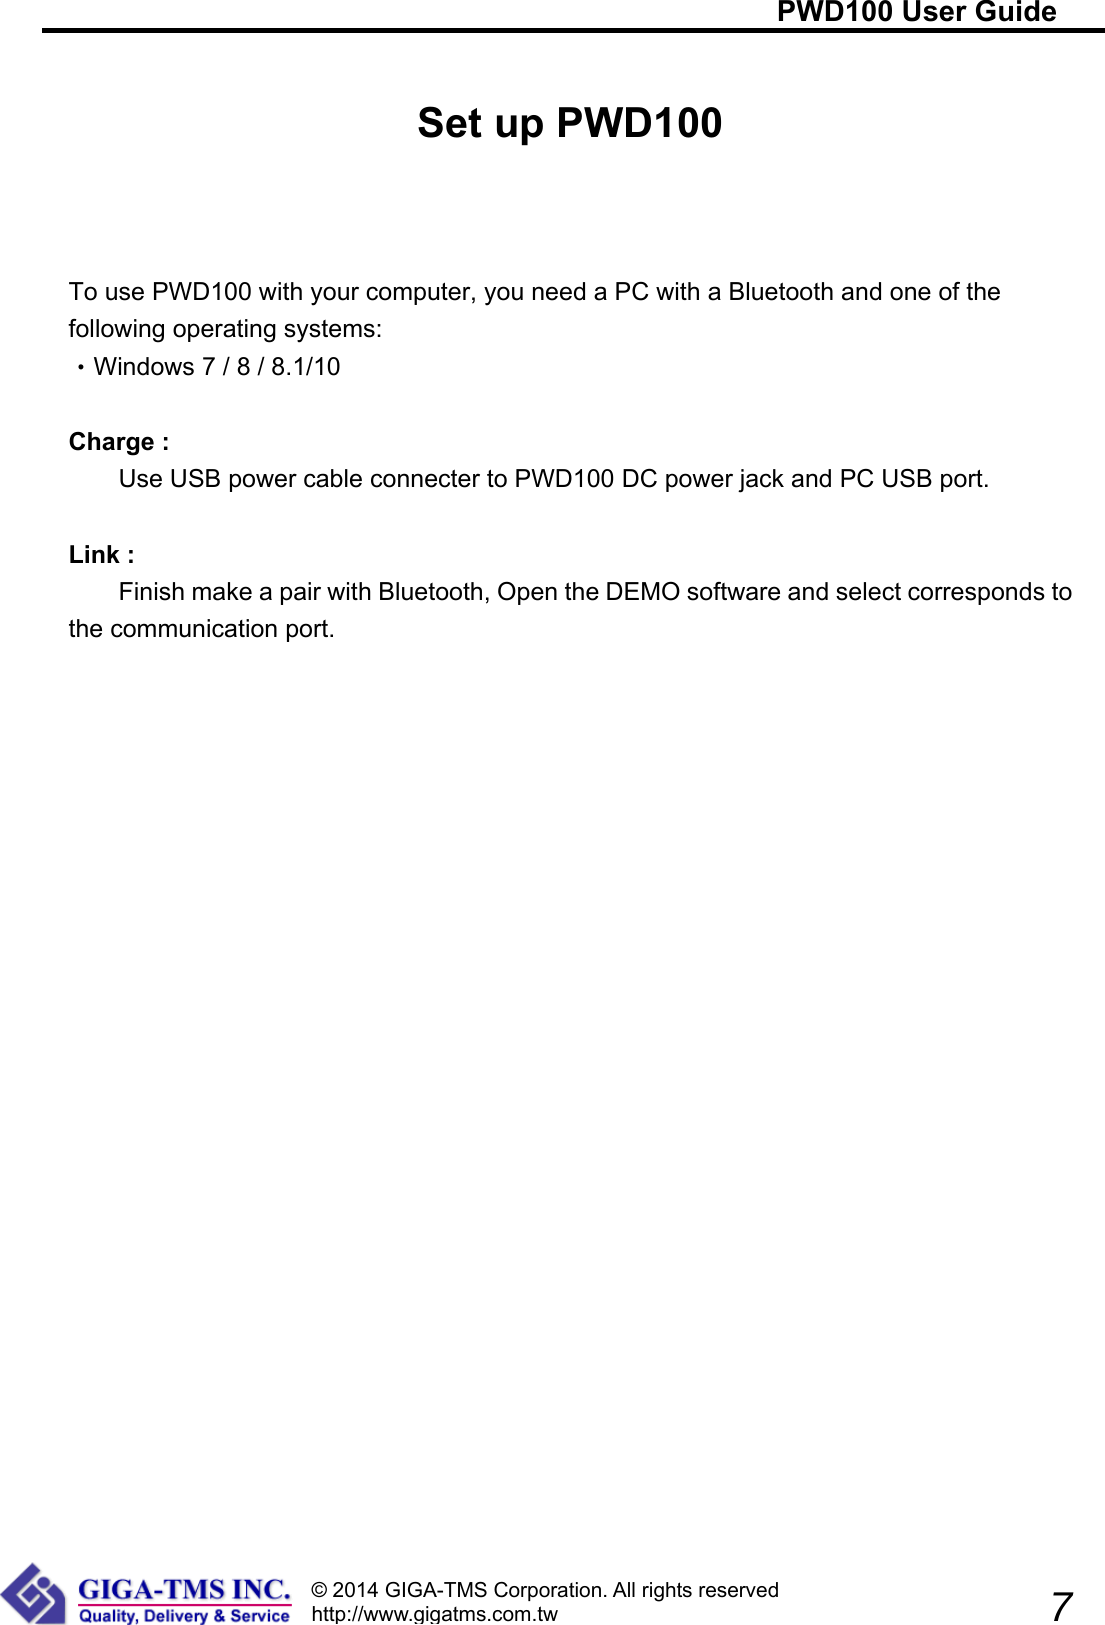                                                                     PWD100 User Guide              7 © 2014 GIGA-TMS Corporation. All rights reserved http://www.gigatms.com.tw Set up PWD100    To use PWD100 with your computer, you need a PC with a Bluetooth and one of the following operating systems: Wi‧ndows 7 / 8 / 8.1/10  Charge :     Use USB power cable connecter to PWD100 DC power jack and PC USB port.  Link :     Finish make a pair with Bluetooth, Open the DEMO software and select corresponds to the communication port.      